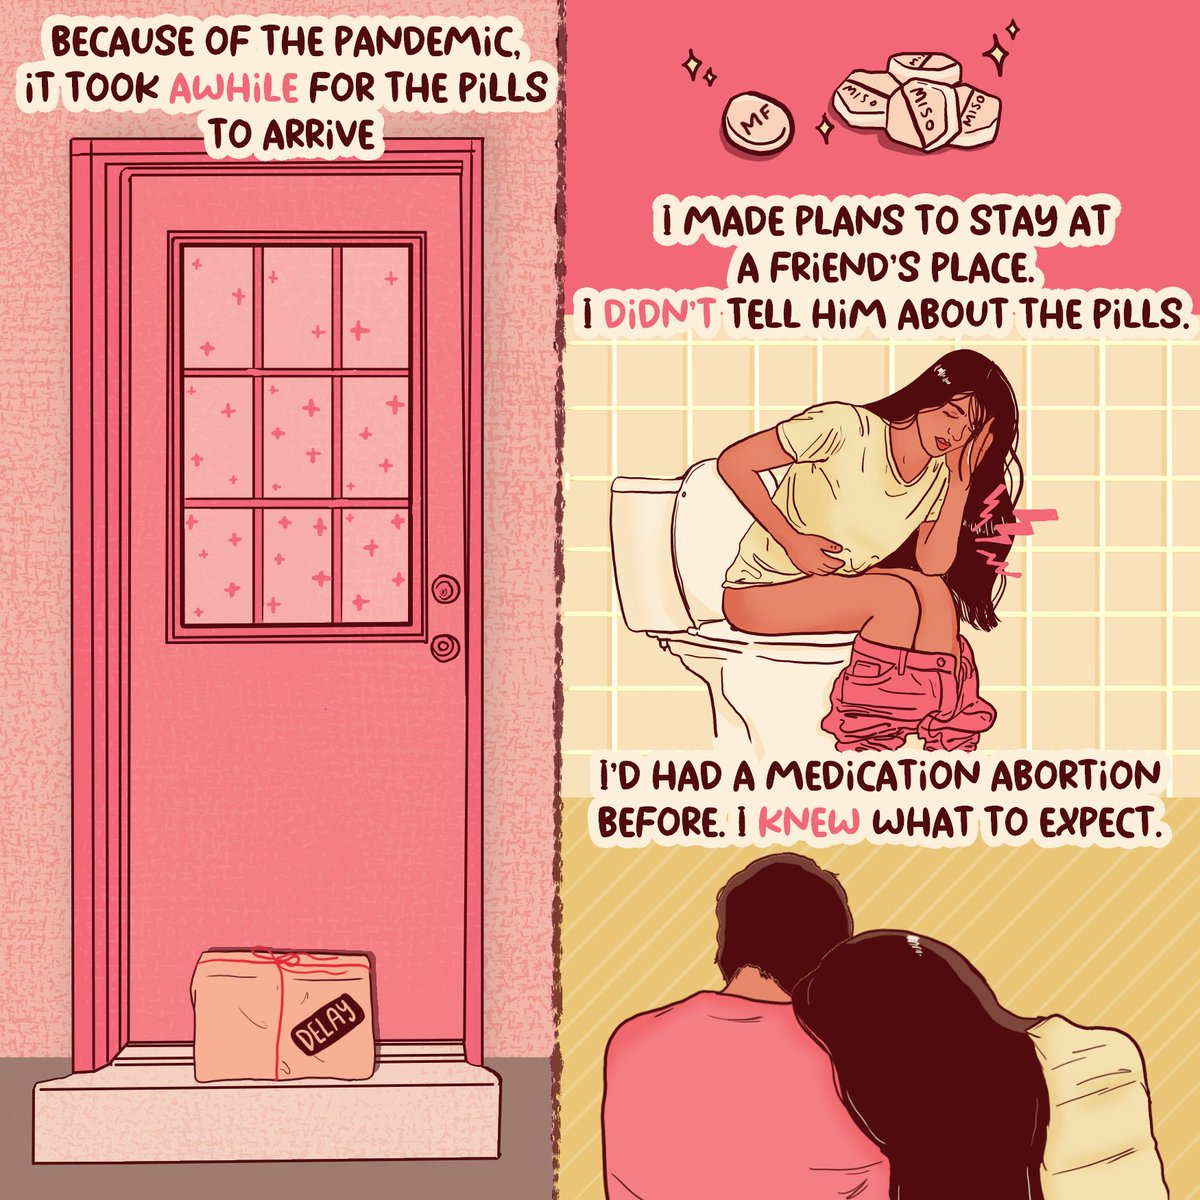 Because of the pandemic, it took a while for the pills to arrive. I made plans to stay at a friend’s place. I didn’t tell him about the pills. I’d had a medication abortion before. I knew what to expect.